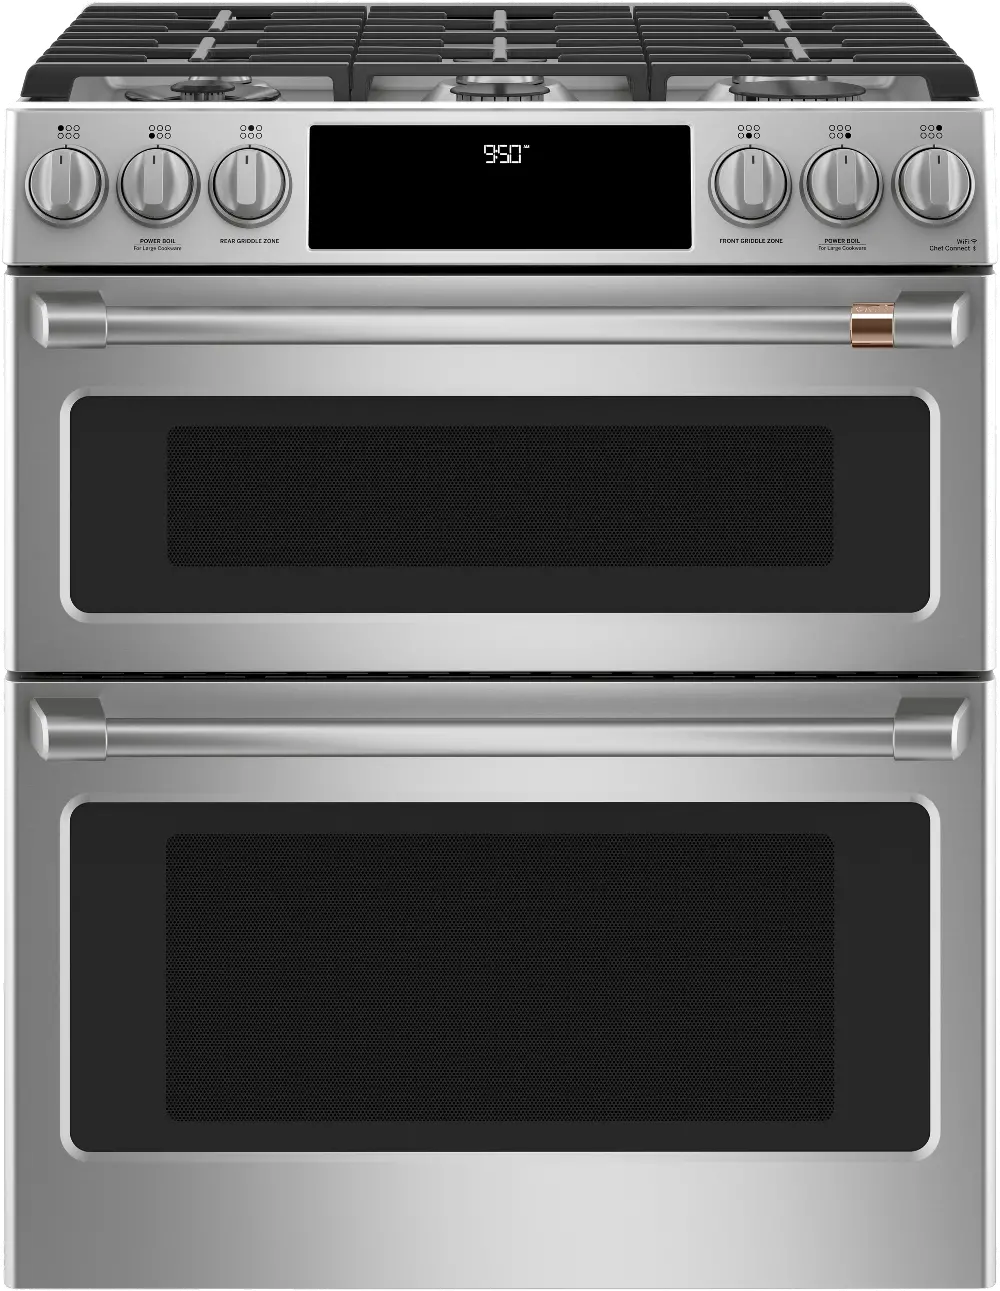 C2S950P2MS1 Cafe 7 cu ft Double Oven Dual Fuel Range - Stainless Steel-1